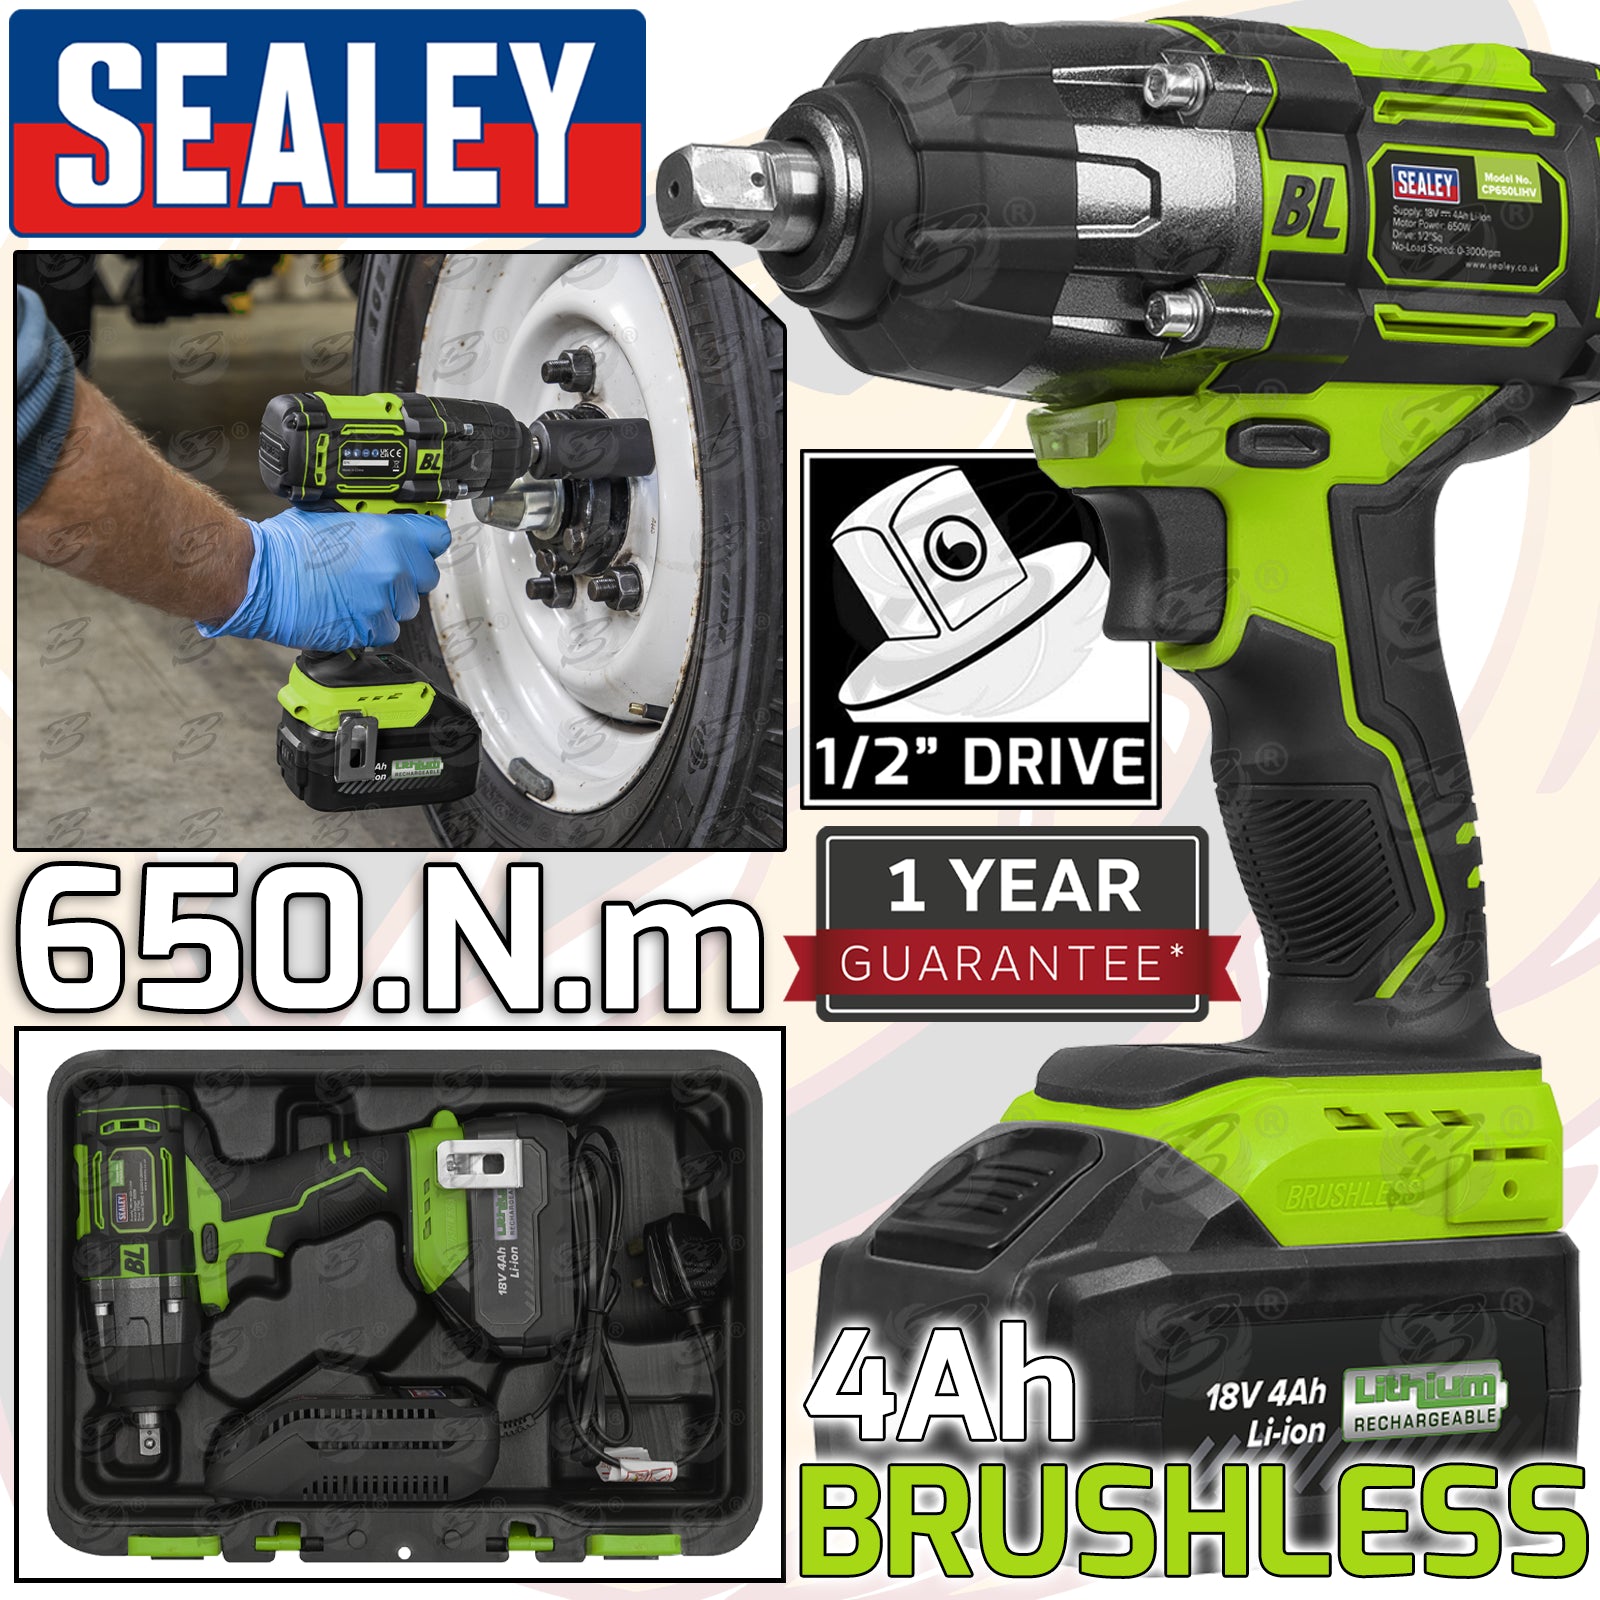 SEALEY 18V 4Ah 1/2" DRIVE BRUSHLESS IMPACT WRENCH 650Nm & 16PCS 6 POINT DEEP IMPACT SOCKETS 10MM - 32MM